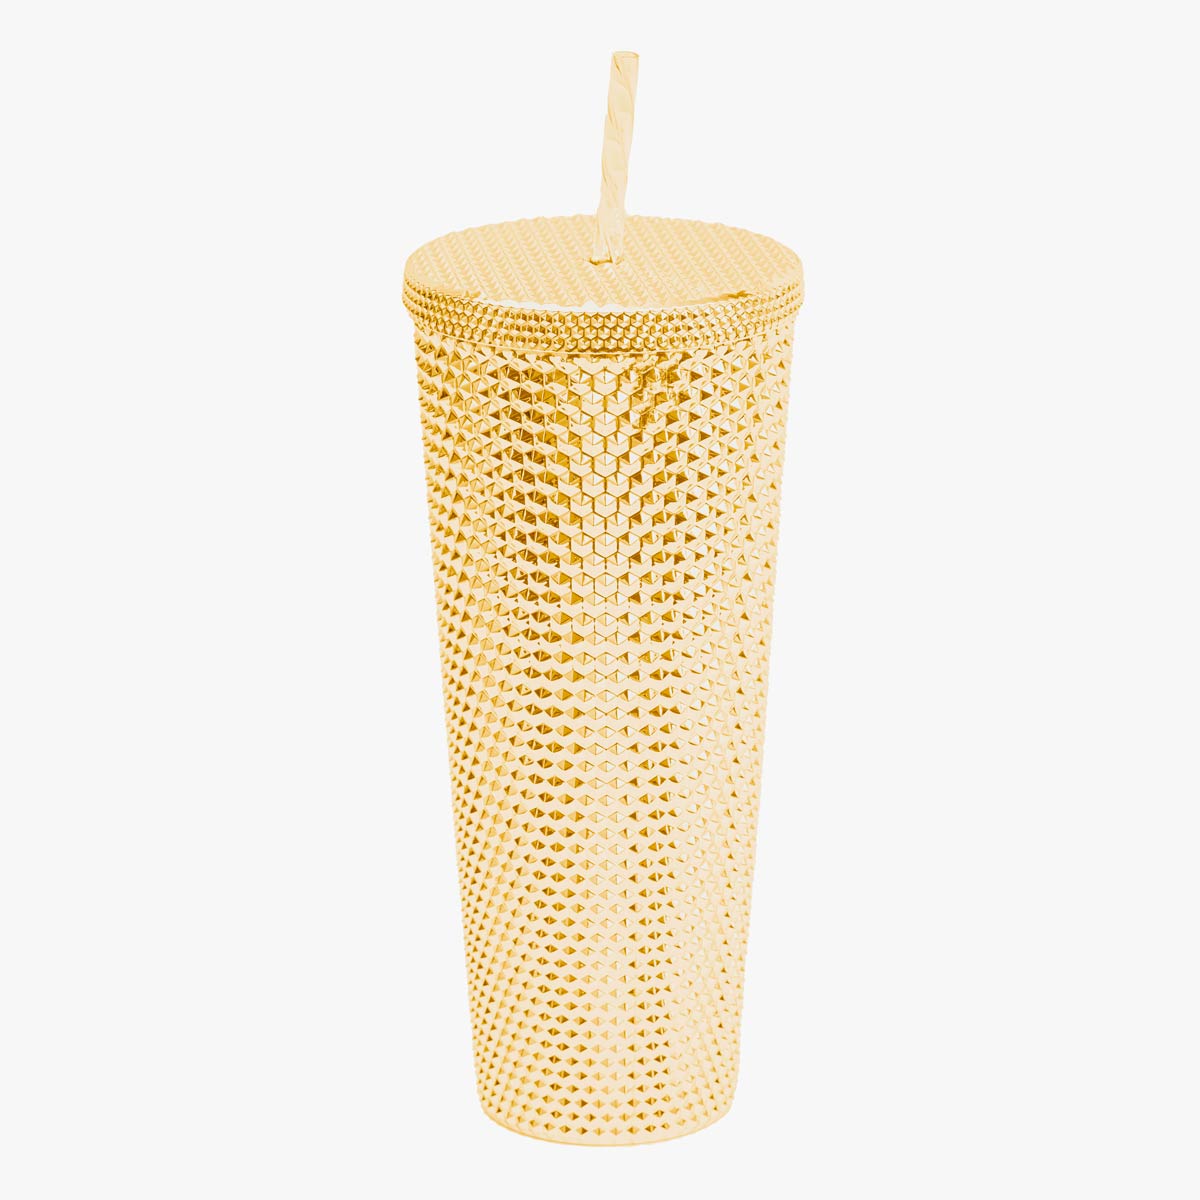 Metallic Gold Textured Tumbler with Straw by Hard Rock image number 2